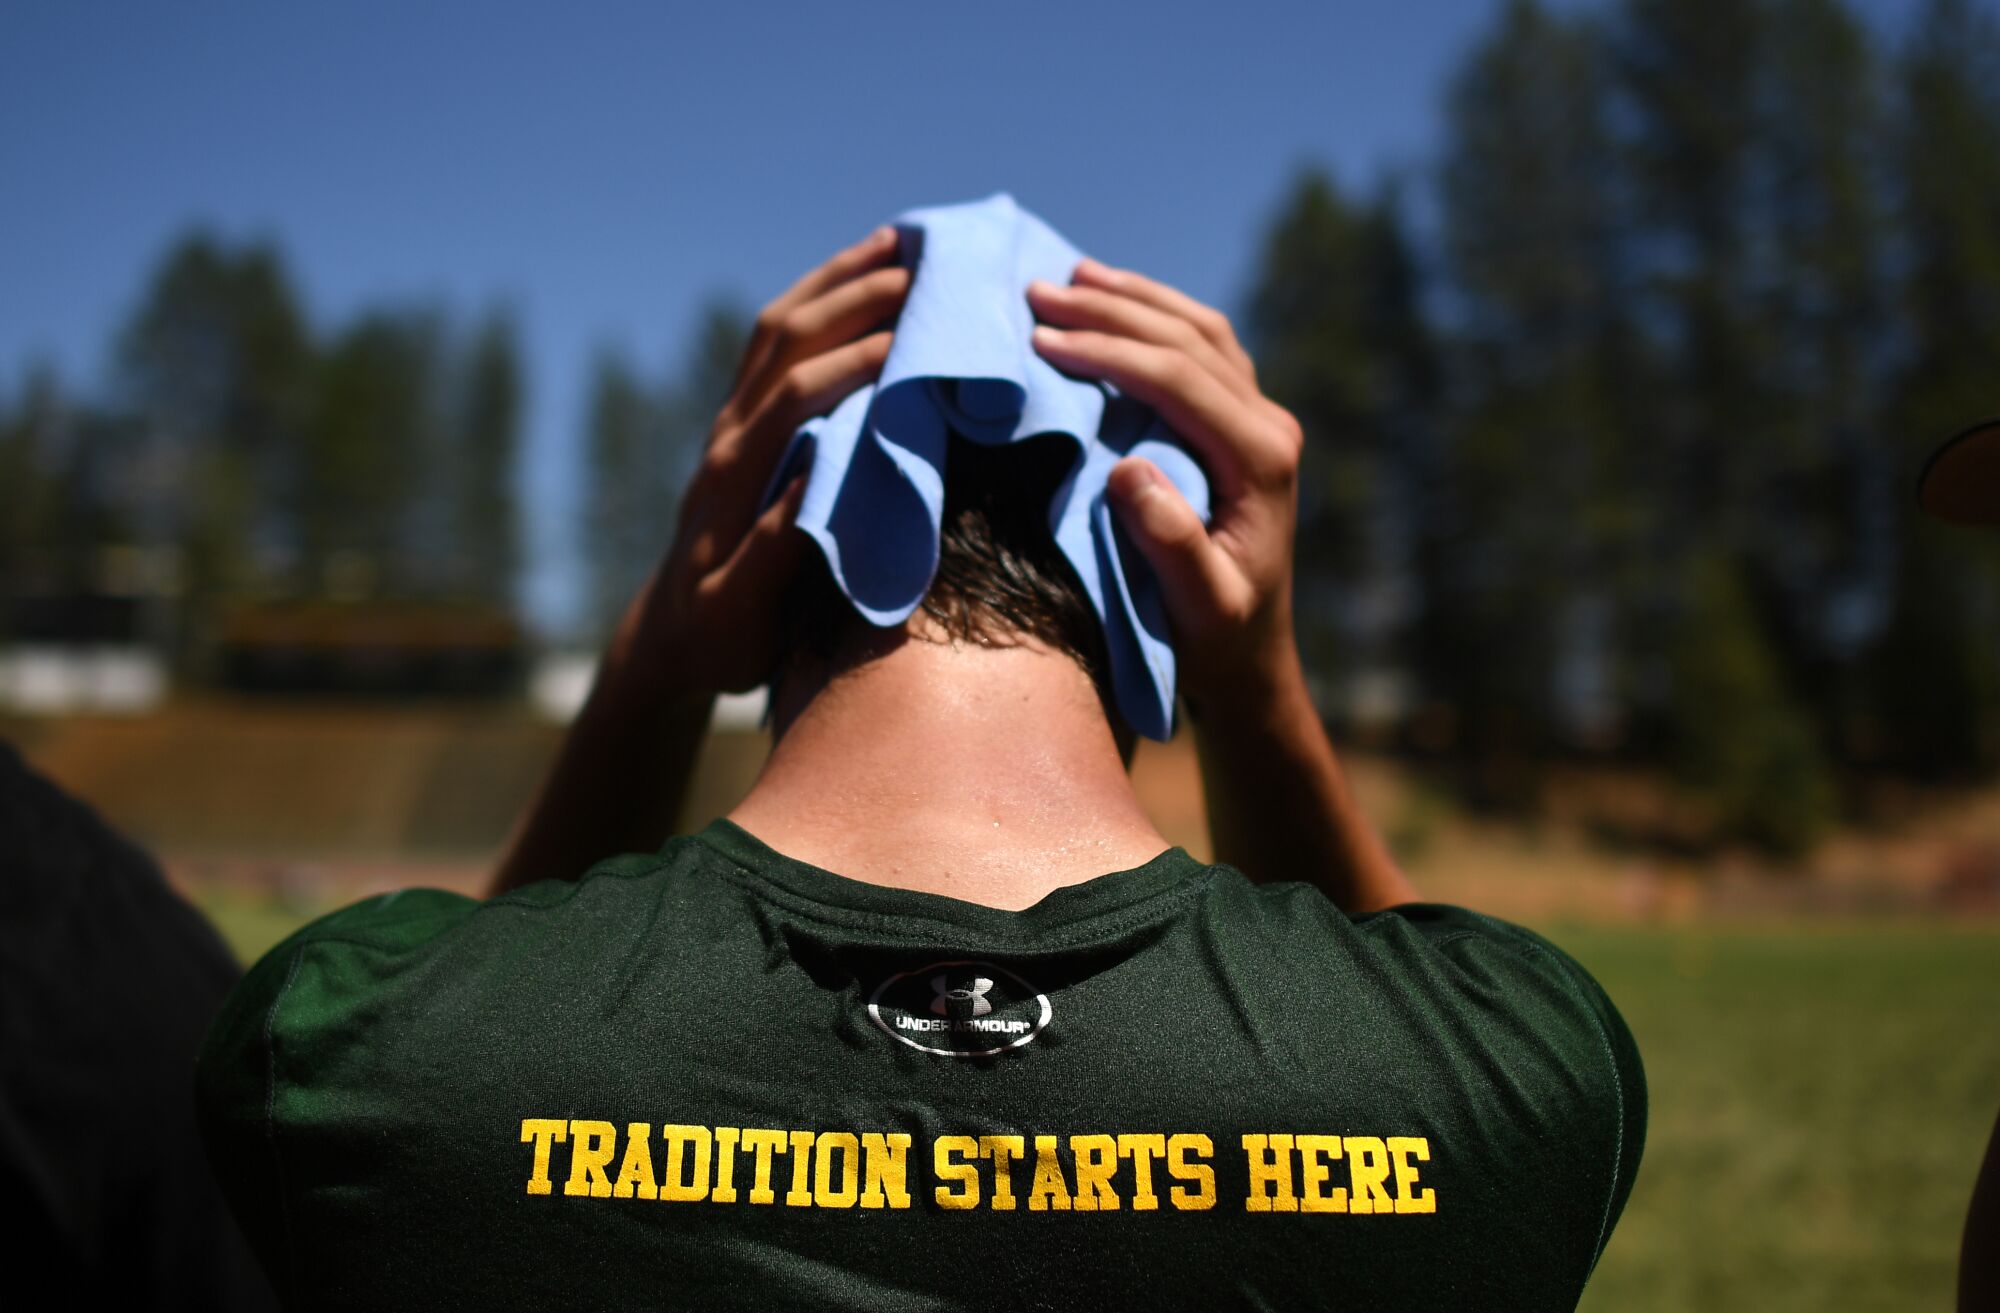 A Paradise football player cools down during a training camp practice session.